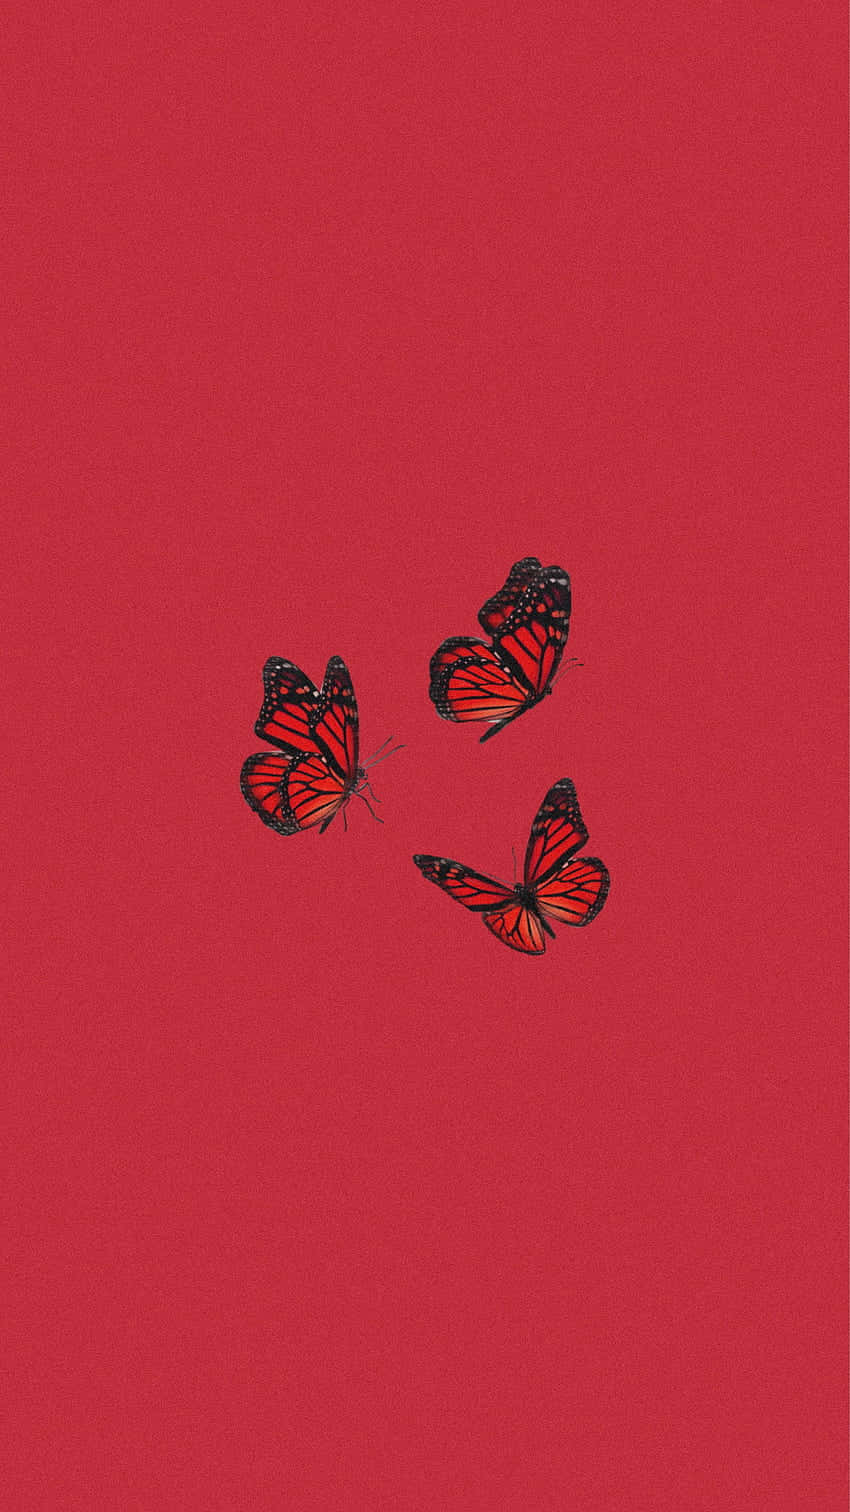 A Red Background With Three Butterflies On It Wallpaper